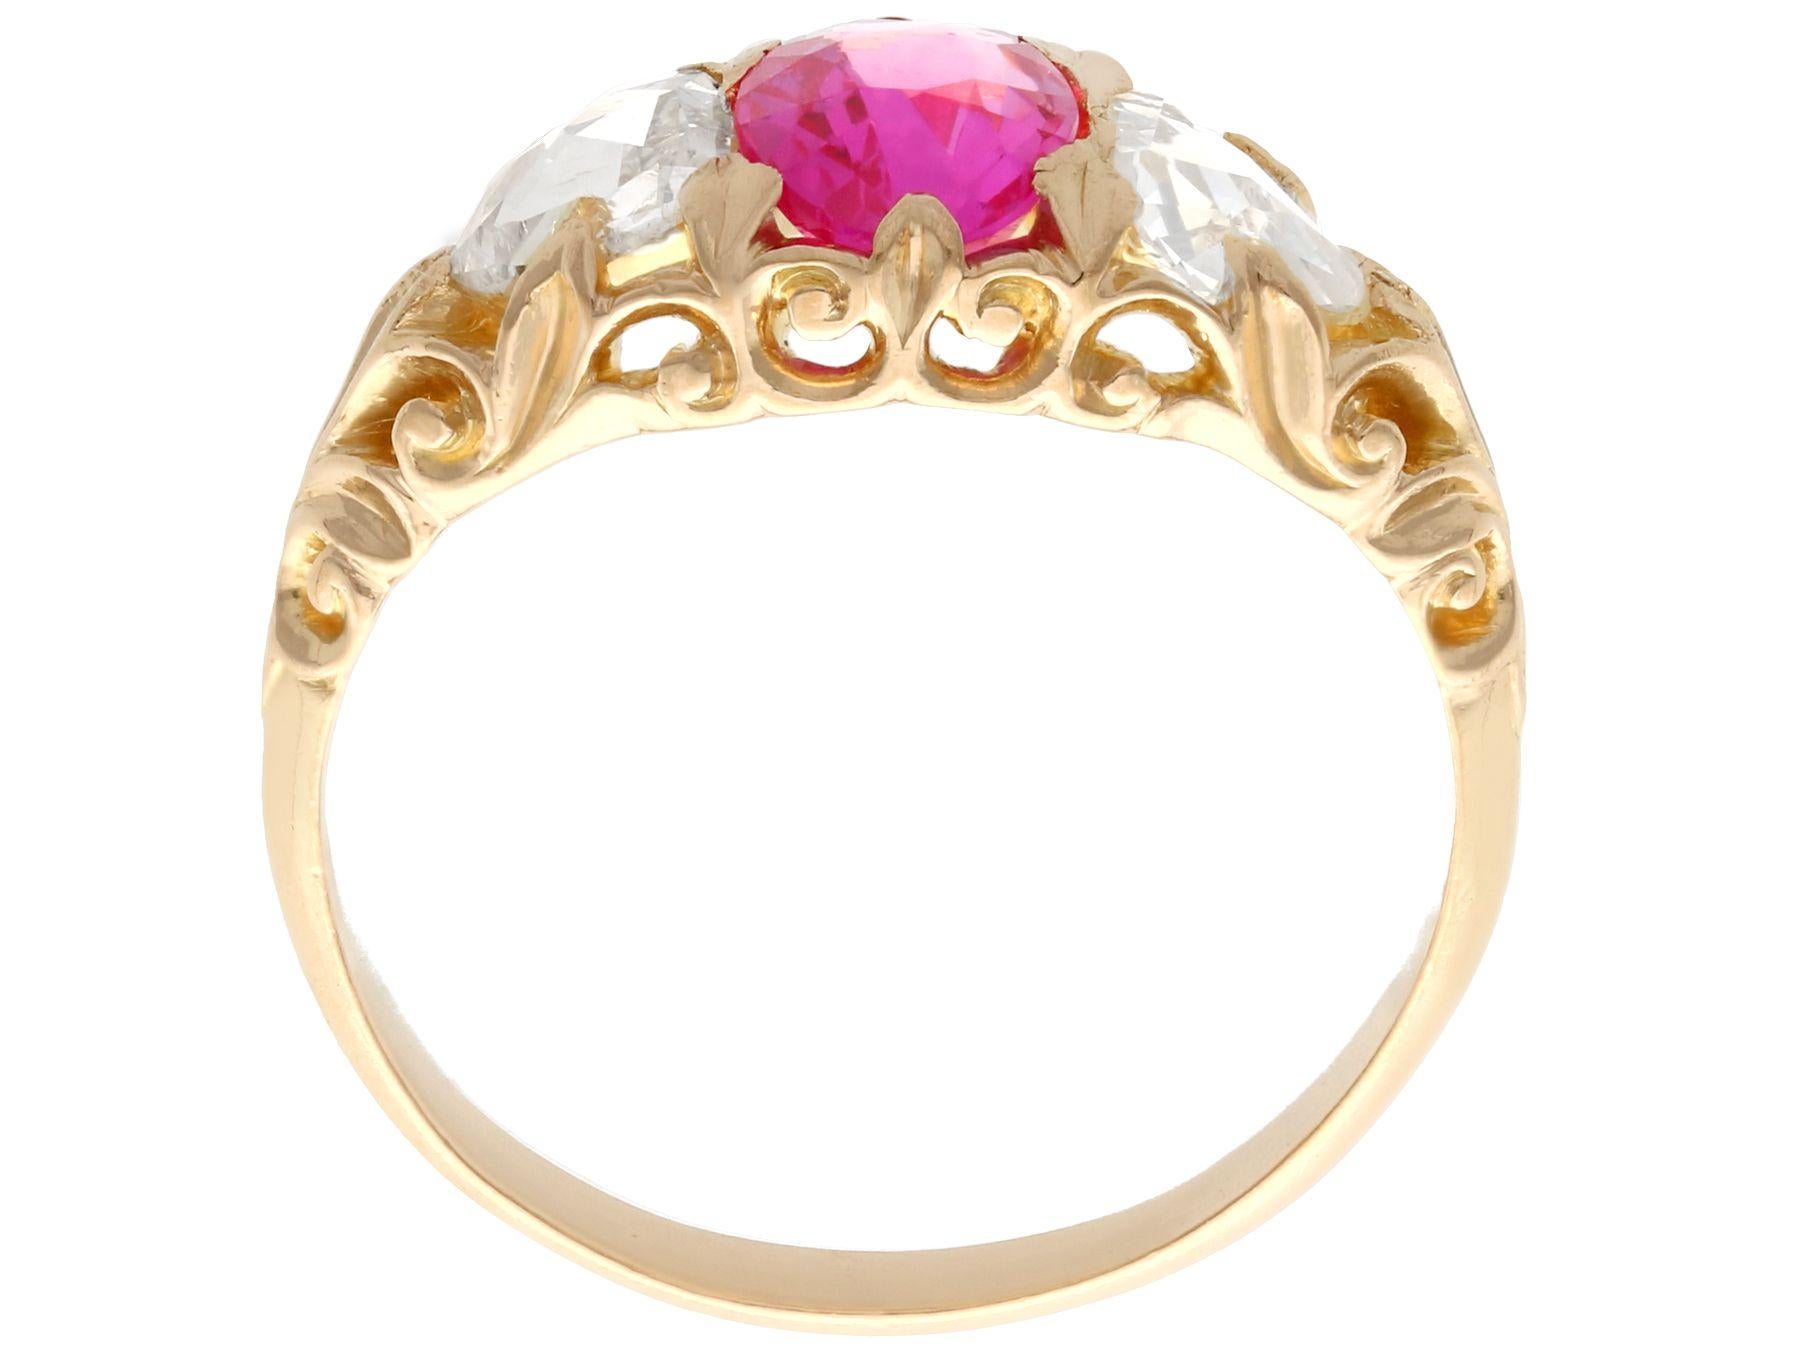 Antique Victorian 1.28 Ct Oval Cut Burmese Pink Sapphire and Diamond Gold Ring For Sale 1